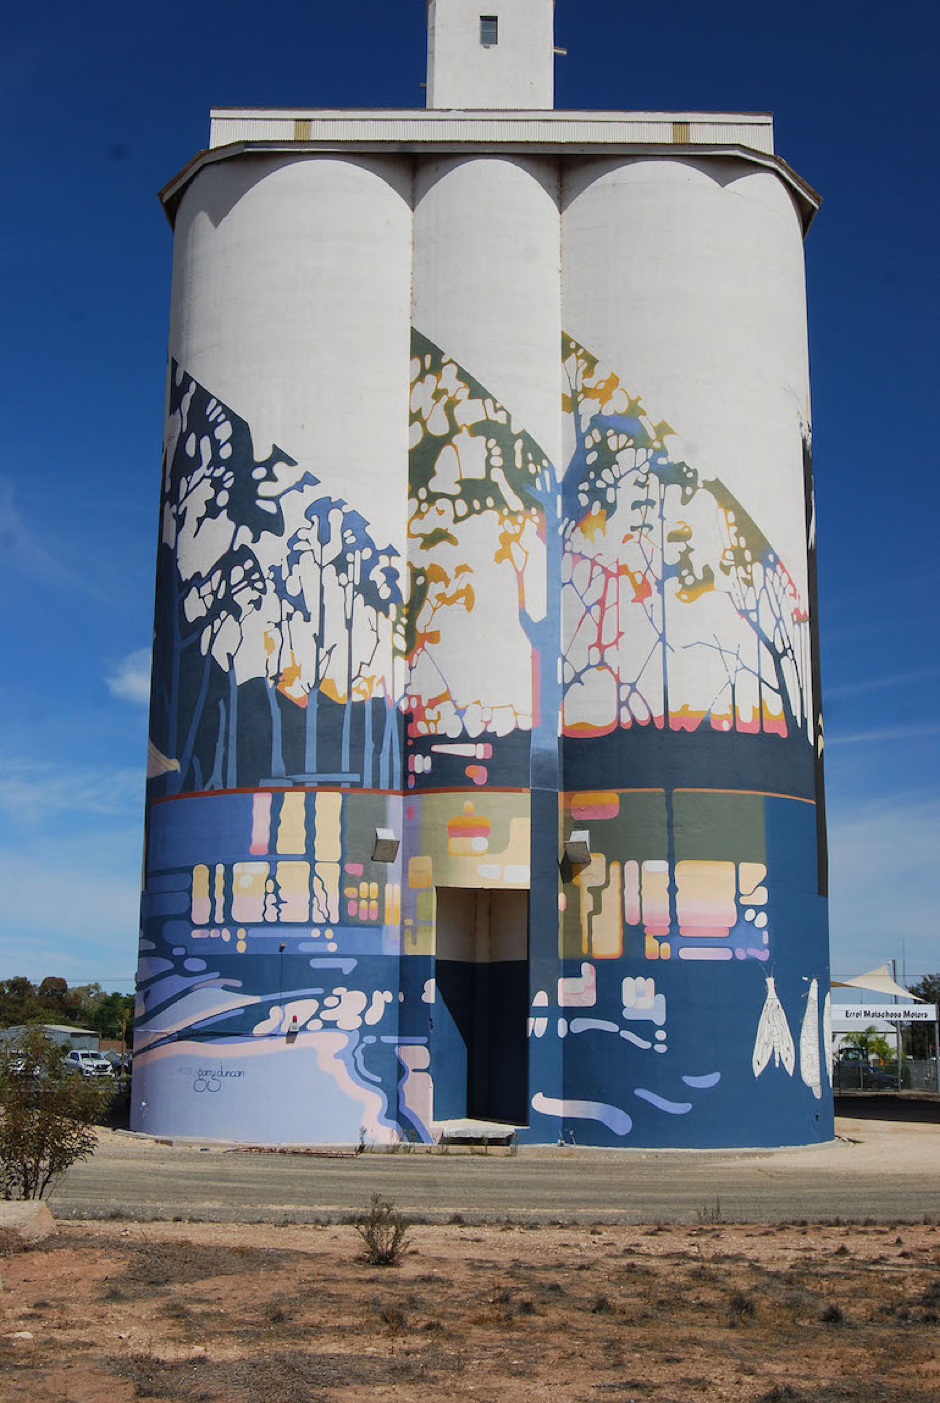 The Waikerie Silo Art project is unique because the silos are painted all the way around and can be viewed from the land and river.